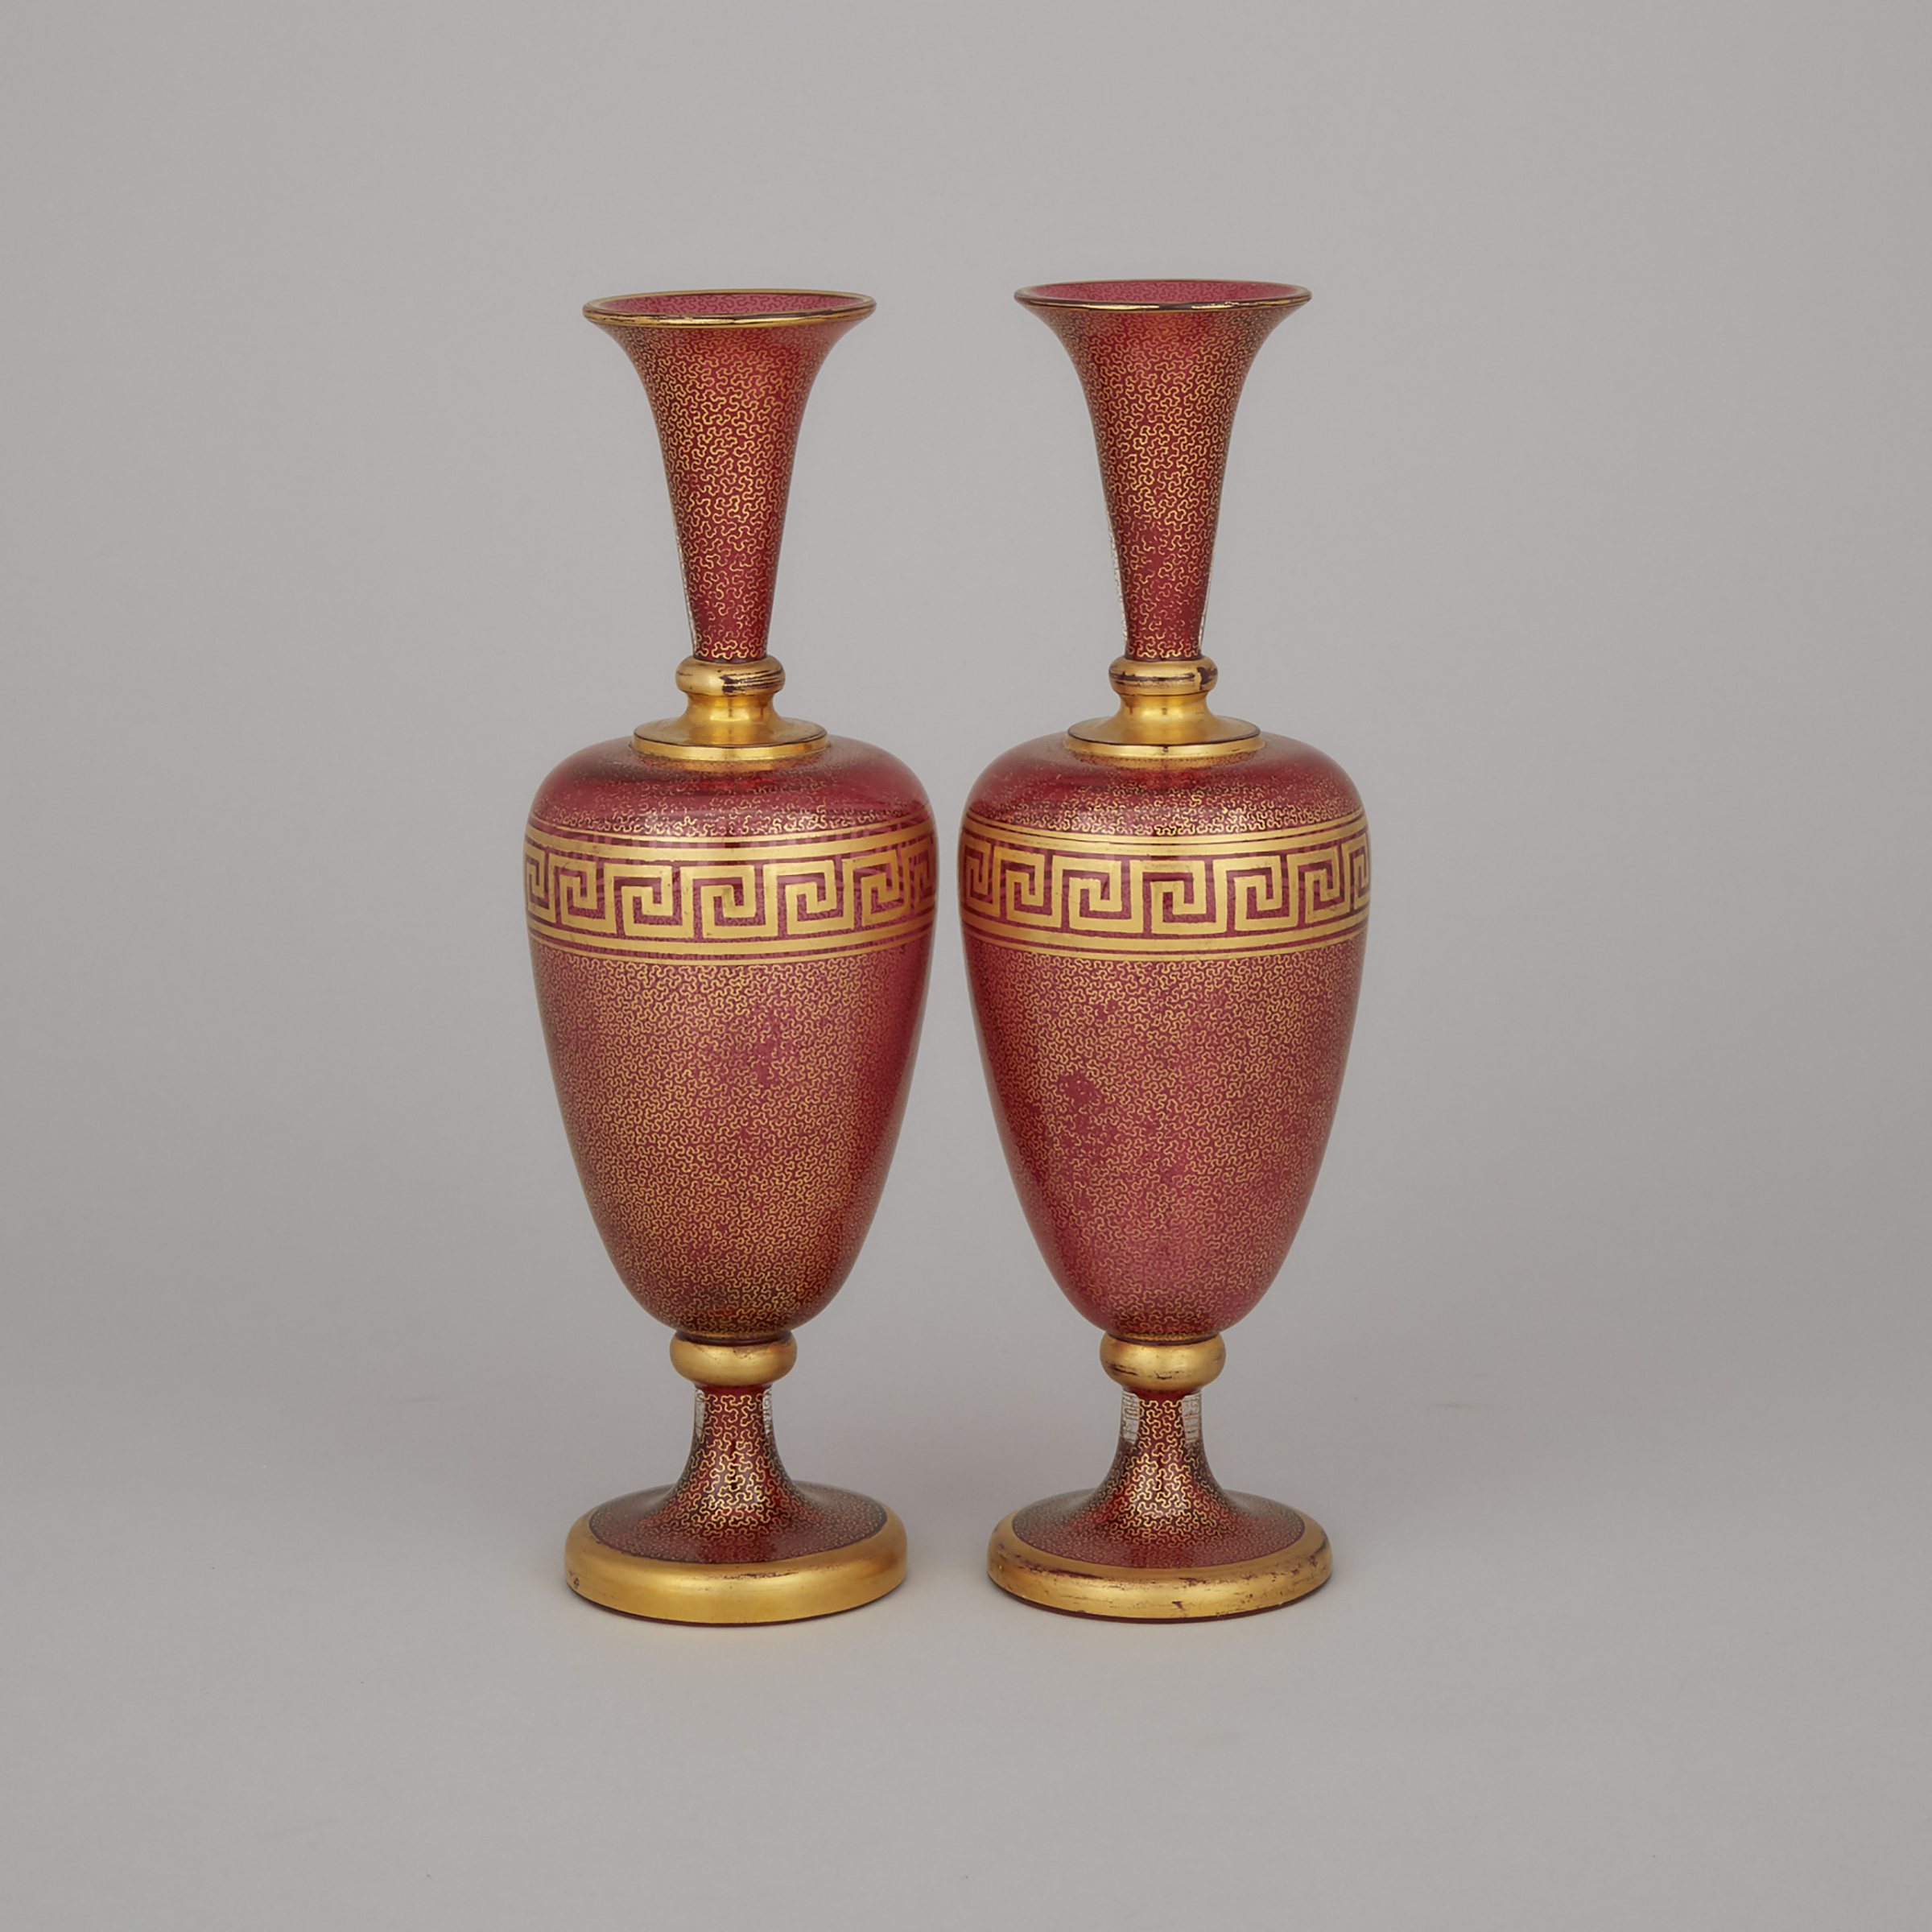 Pair of Bohemian Gilt Decorated Red Glass Vases, late 19th century